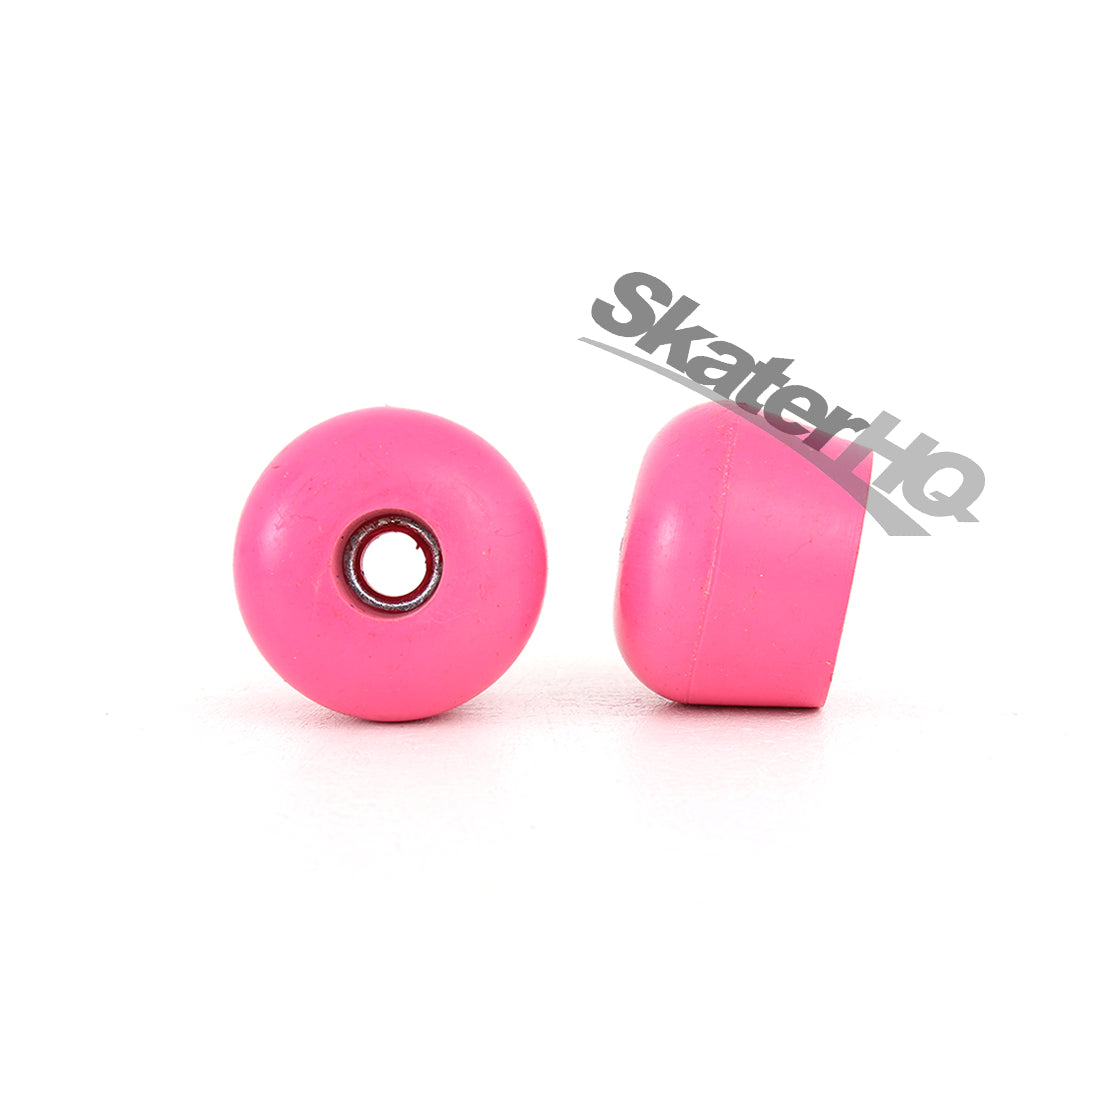 Sure-Grip Dance Toe Stops X Small PAIR - Pink Roller Skate Hardware and Parts